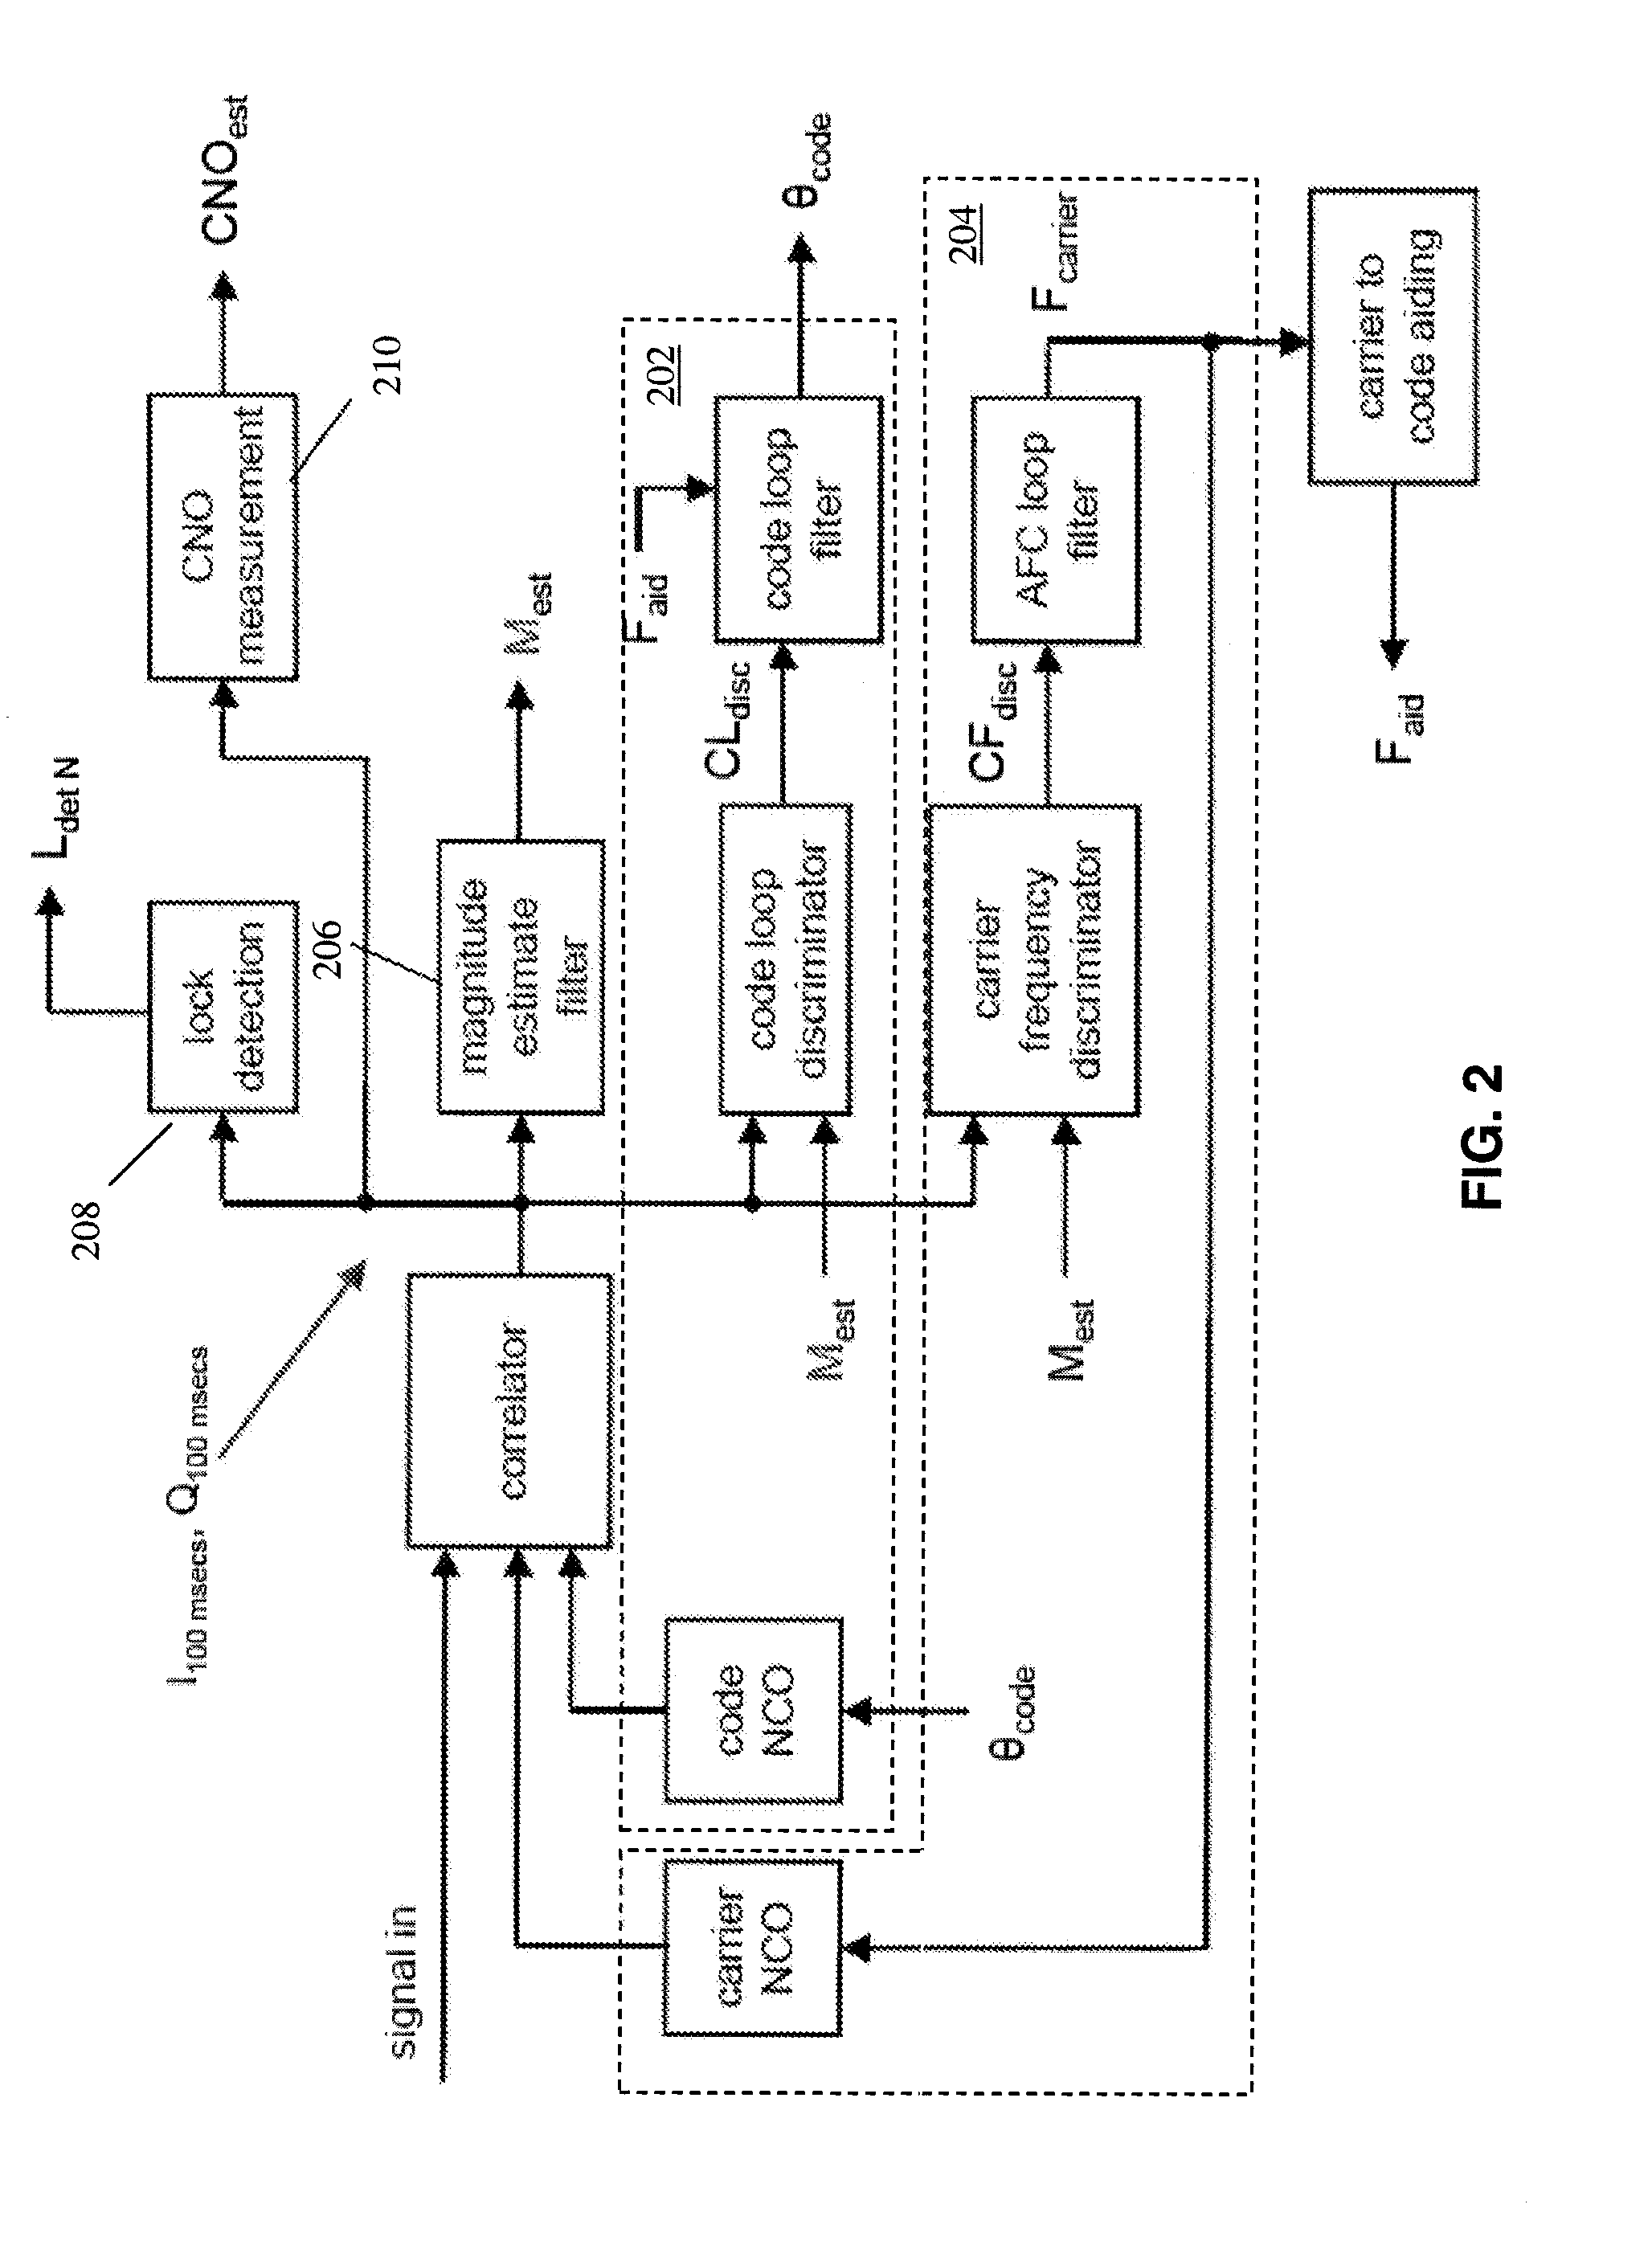 Method and apparatus for managing and configuring tracker components for enhanced sensitivity tracking of GNSS signals